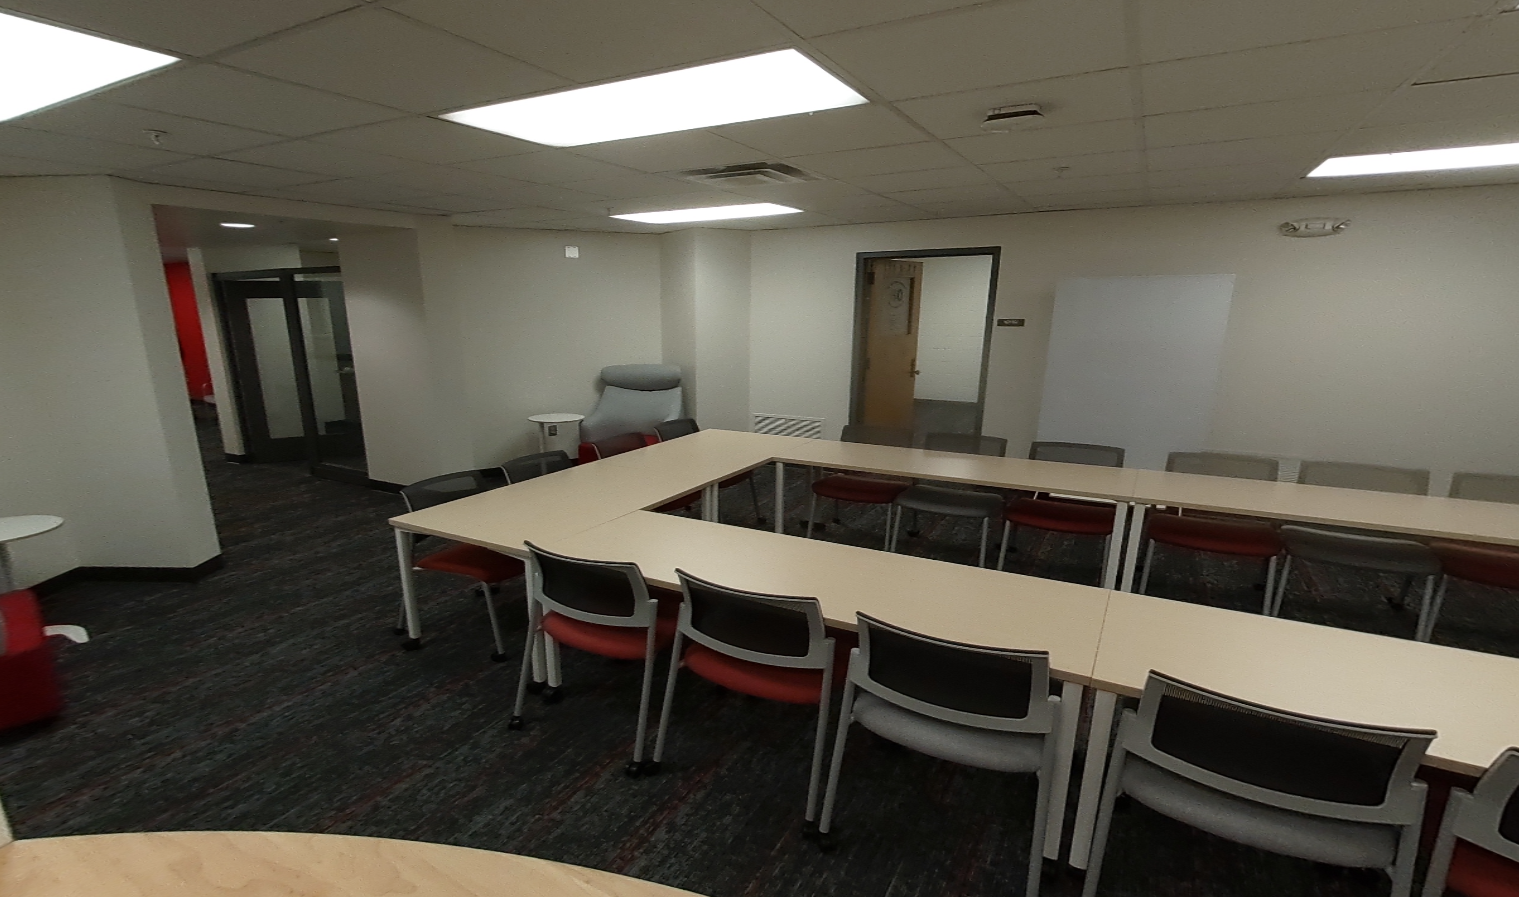 "After" photo of student lounge. Brighter, more open space, all new furniture and light wood table tops. More open-concept